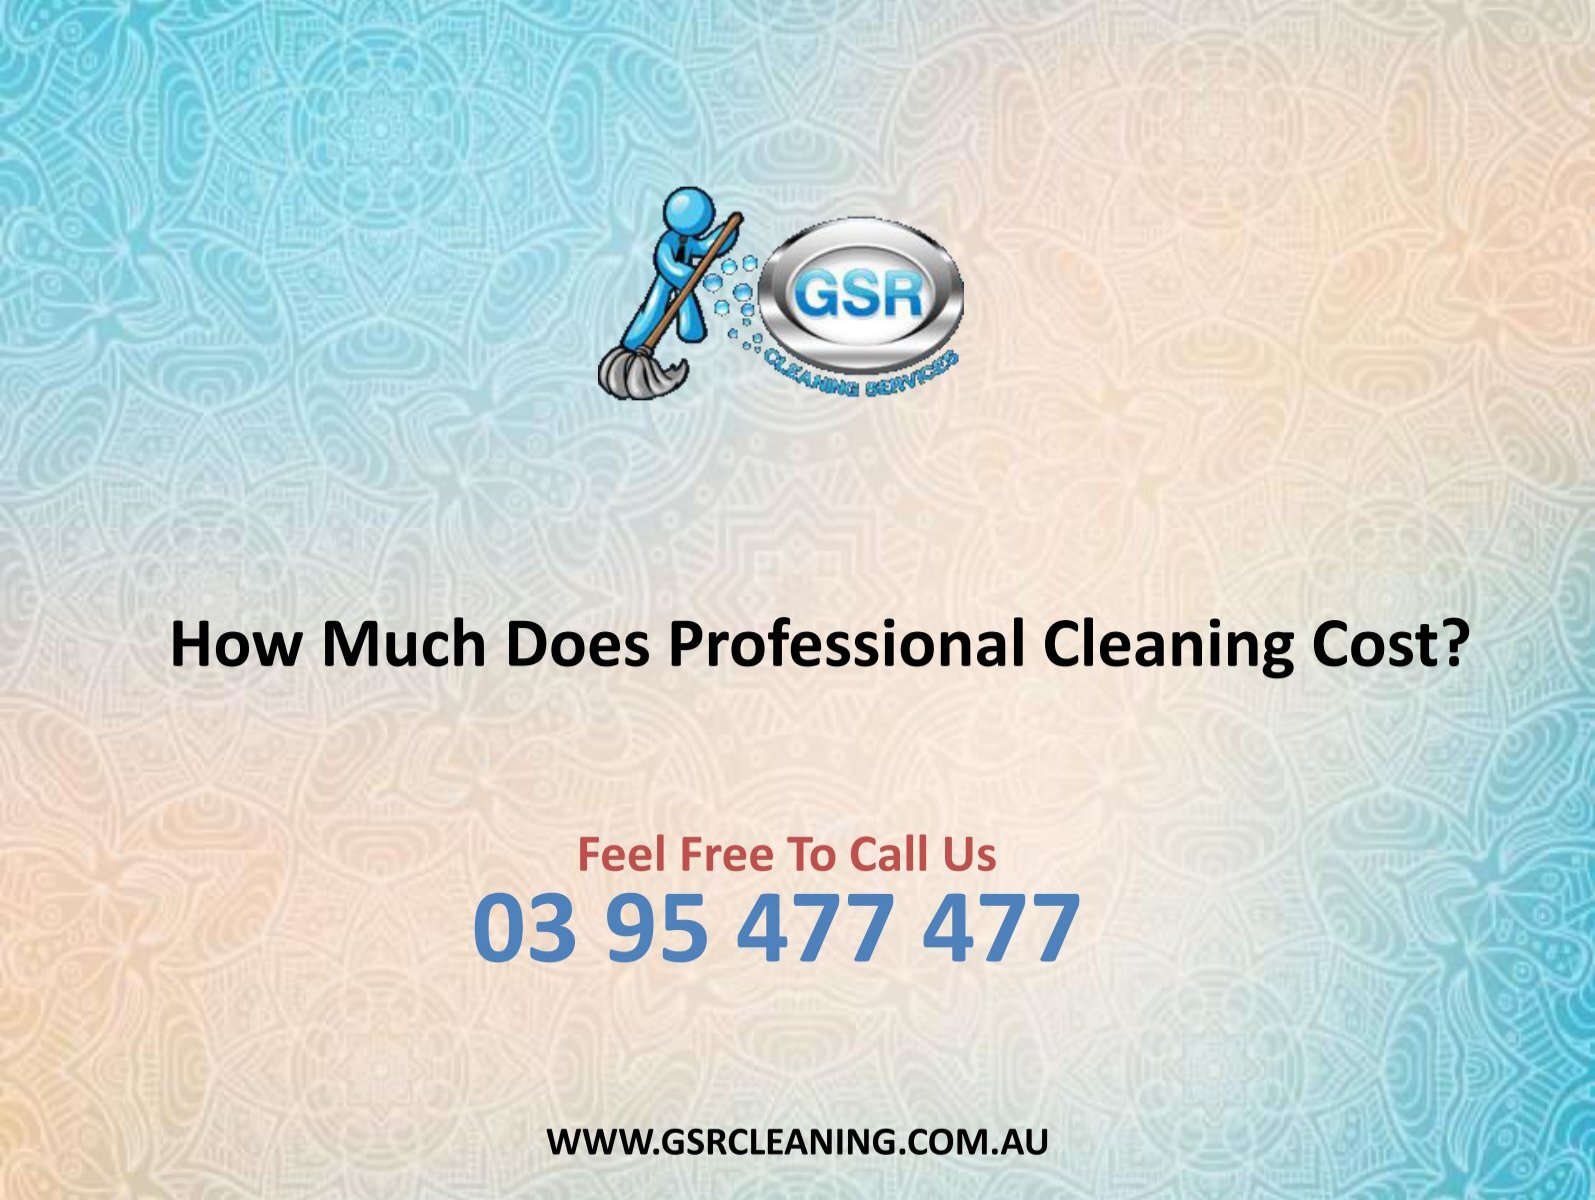 How Much Does Professional Cleaning Cost